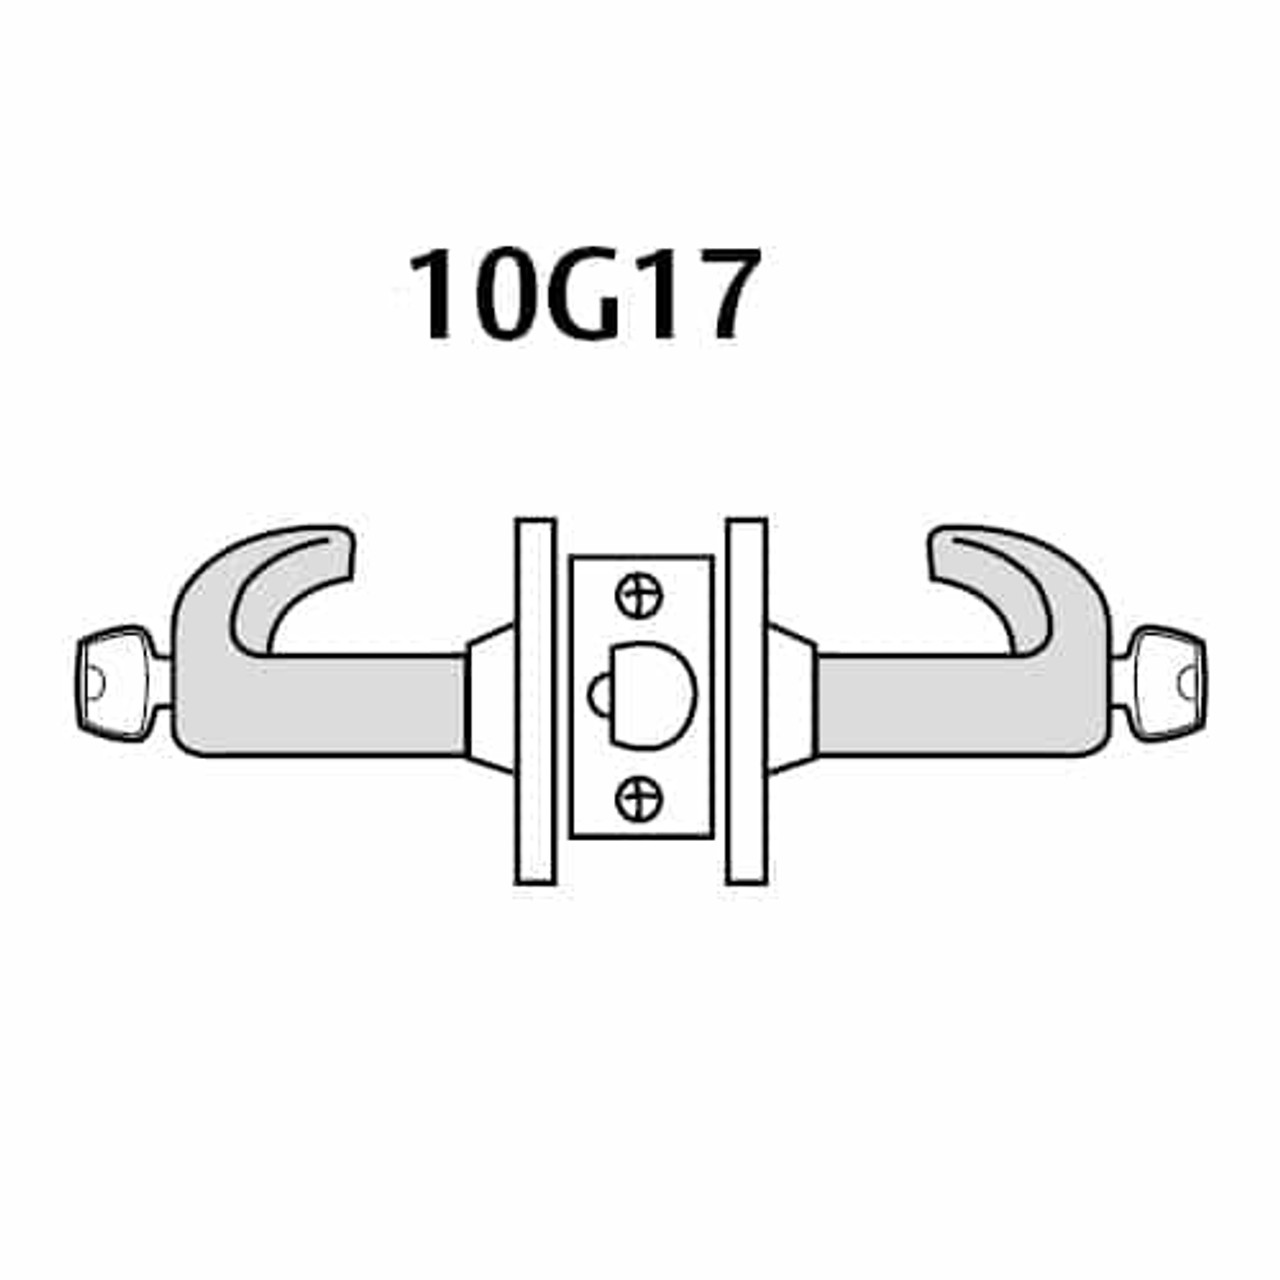 2860-10G17-LB-04 Sargent 10 Line Cylindrical Institutional Locks with B Lever Design and L Rose Prepped for LFIC in Satin Brass